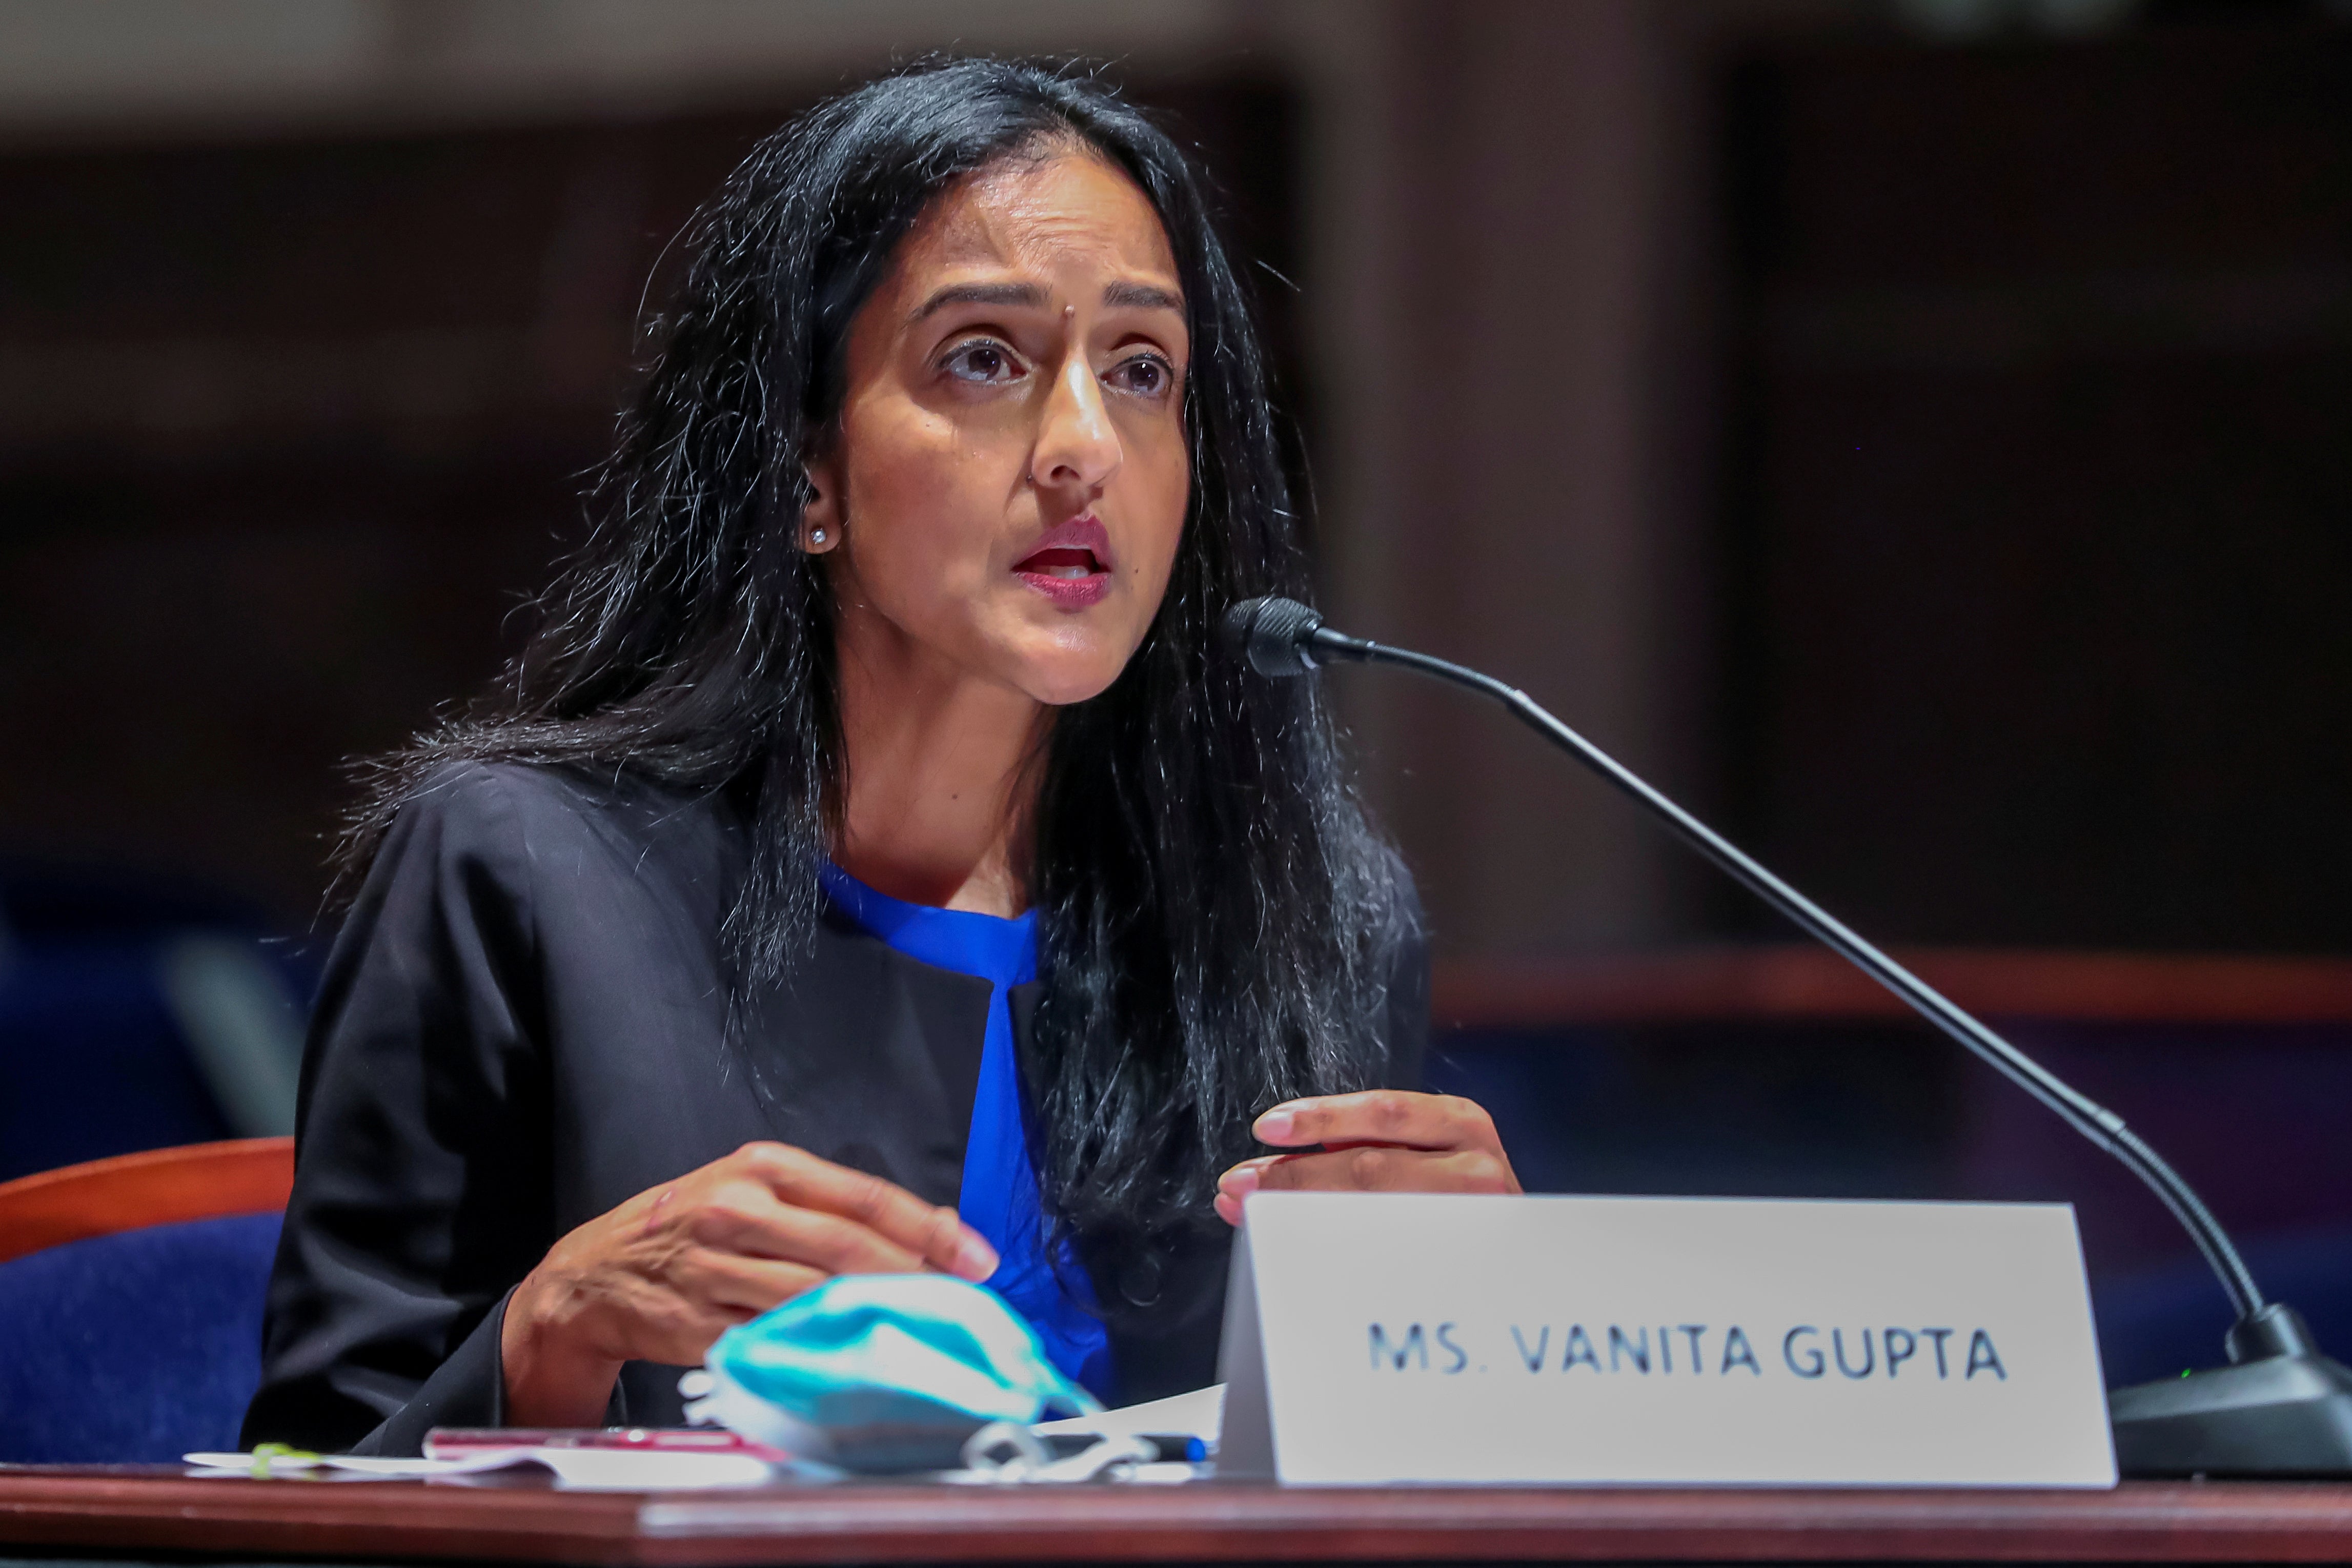 President of the Leadership Conference on Civil and Human Rights Vanita Gupta speaks during the House Judiciary Committee hearing on Policing Practices and Law Enforcement Accountability at the U.S. Capitol in Washington, DC, U.S. June 10, 2020. Michael Reynolds/Pool via REUTERS/File Photo